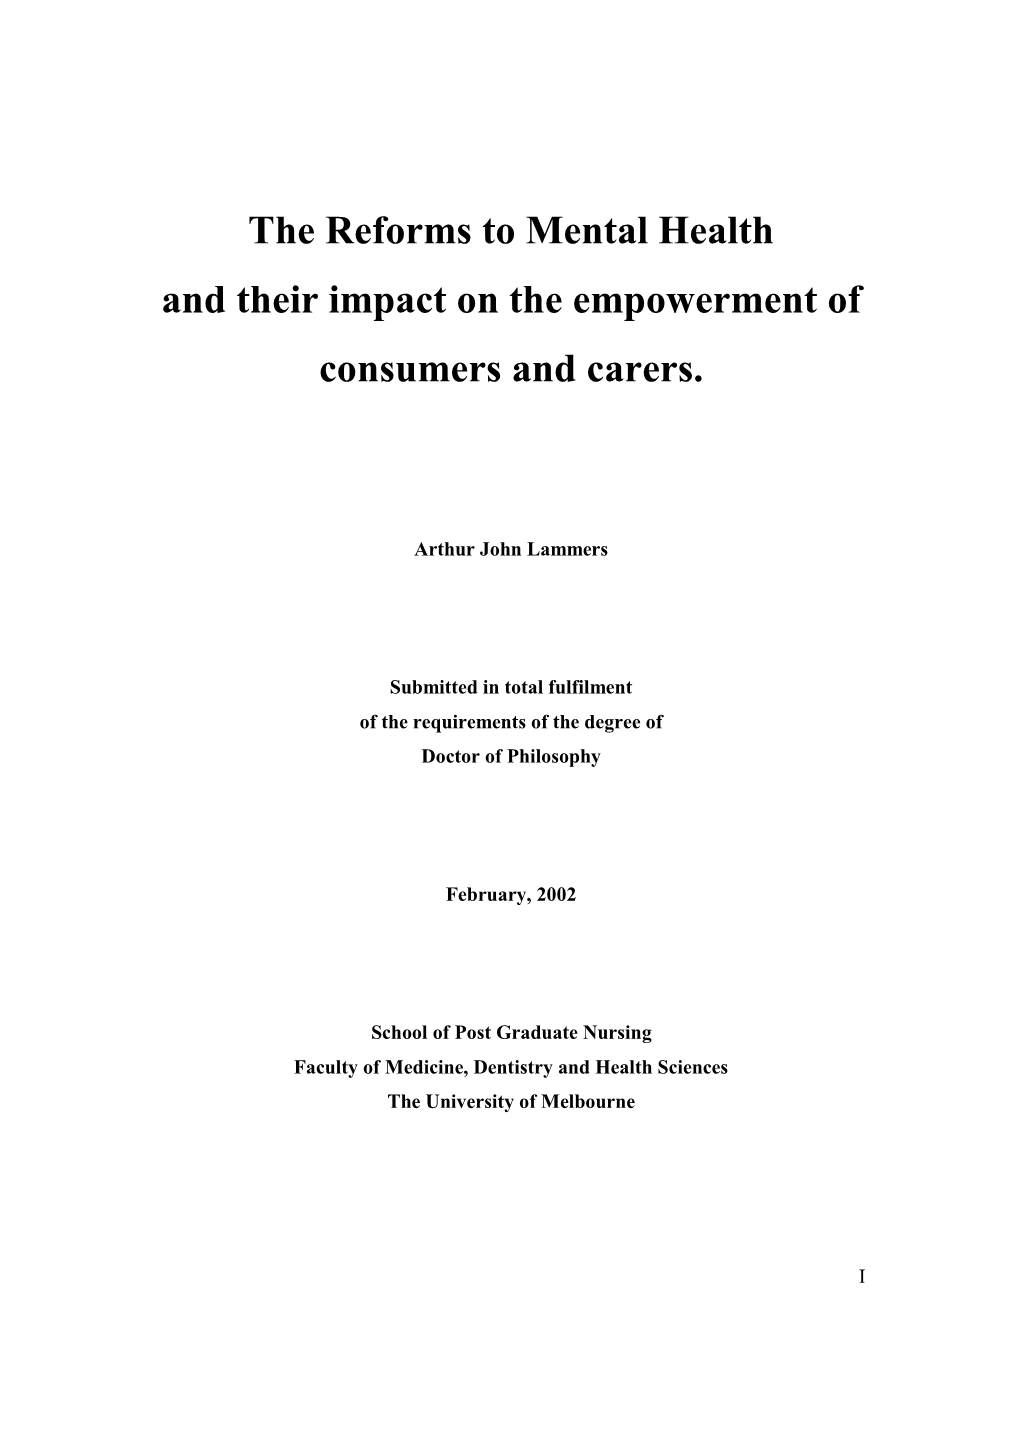 The Reforms to Mental Health and Their Impact on the Empowerment Of